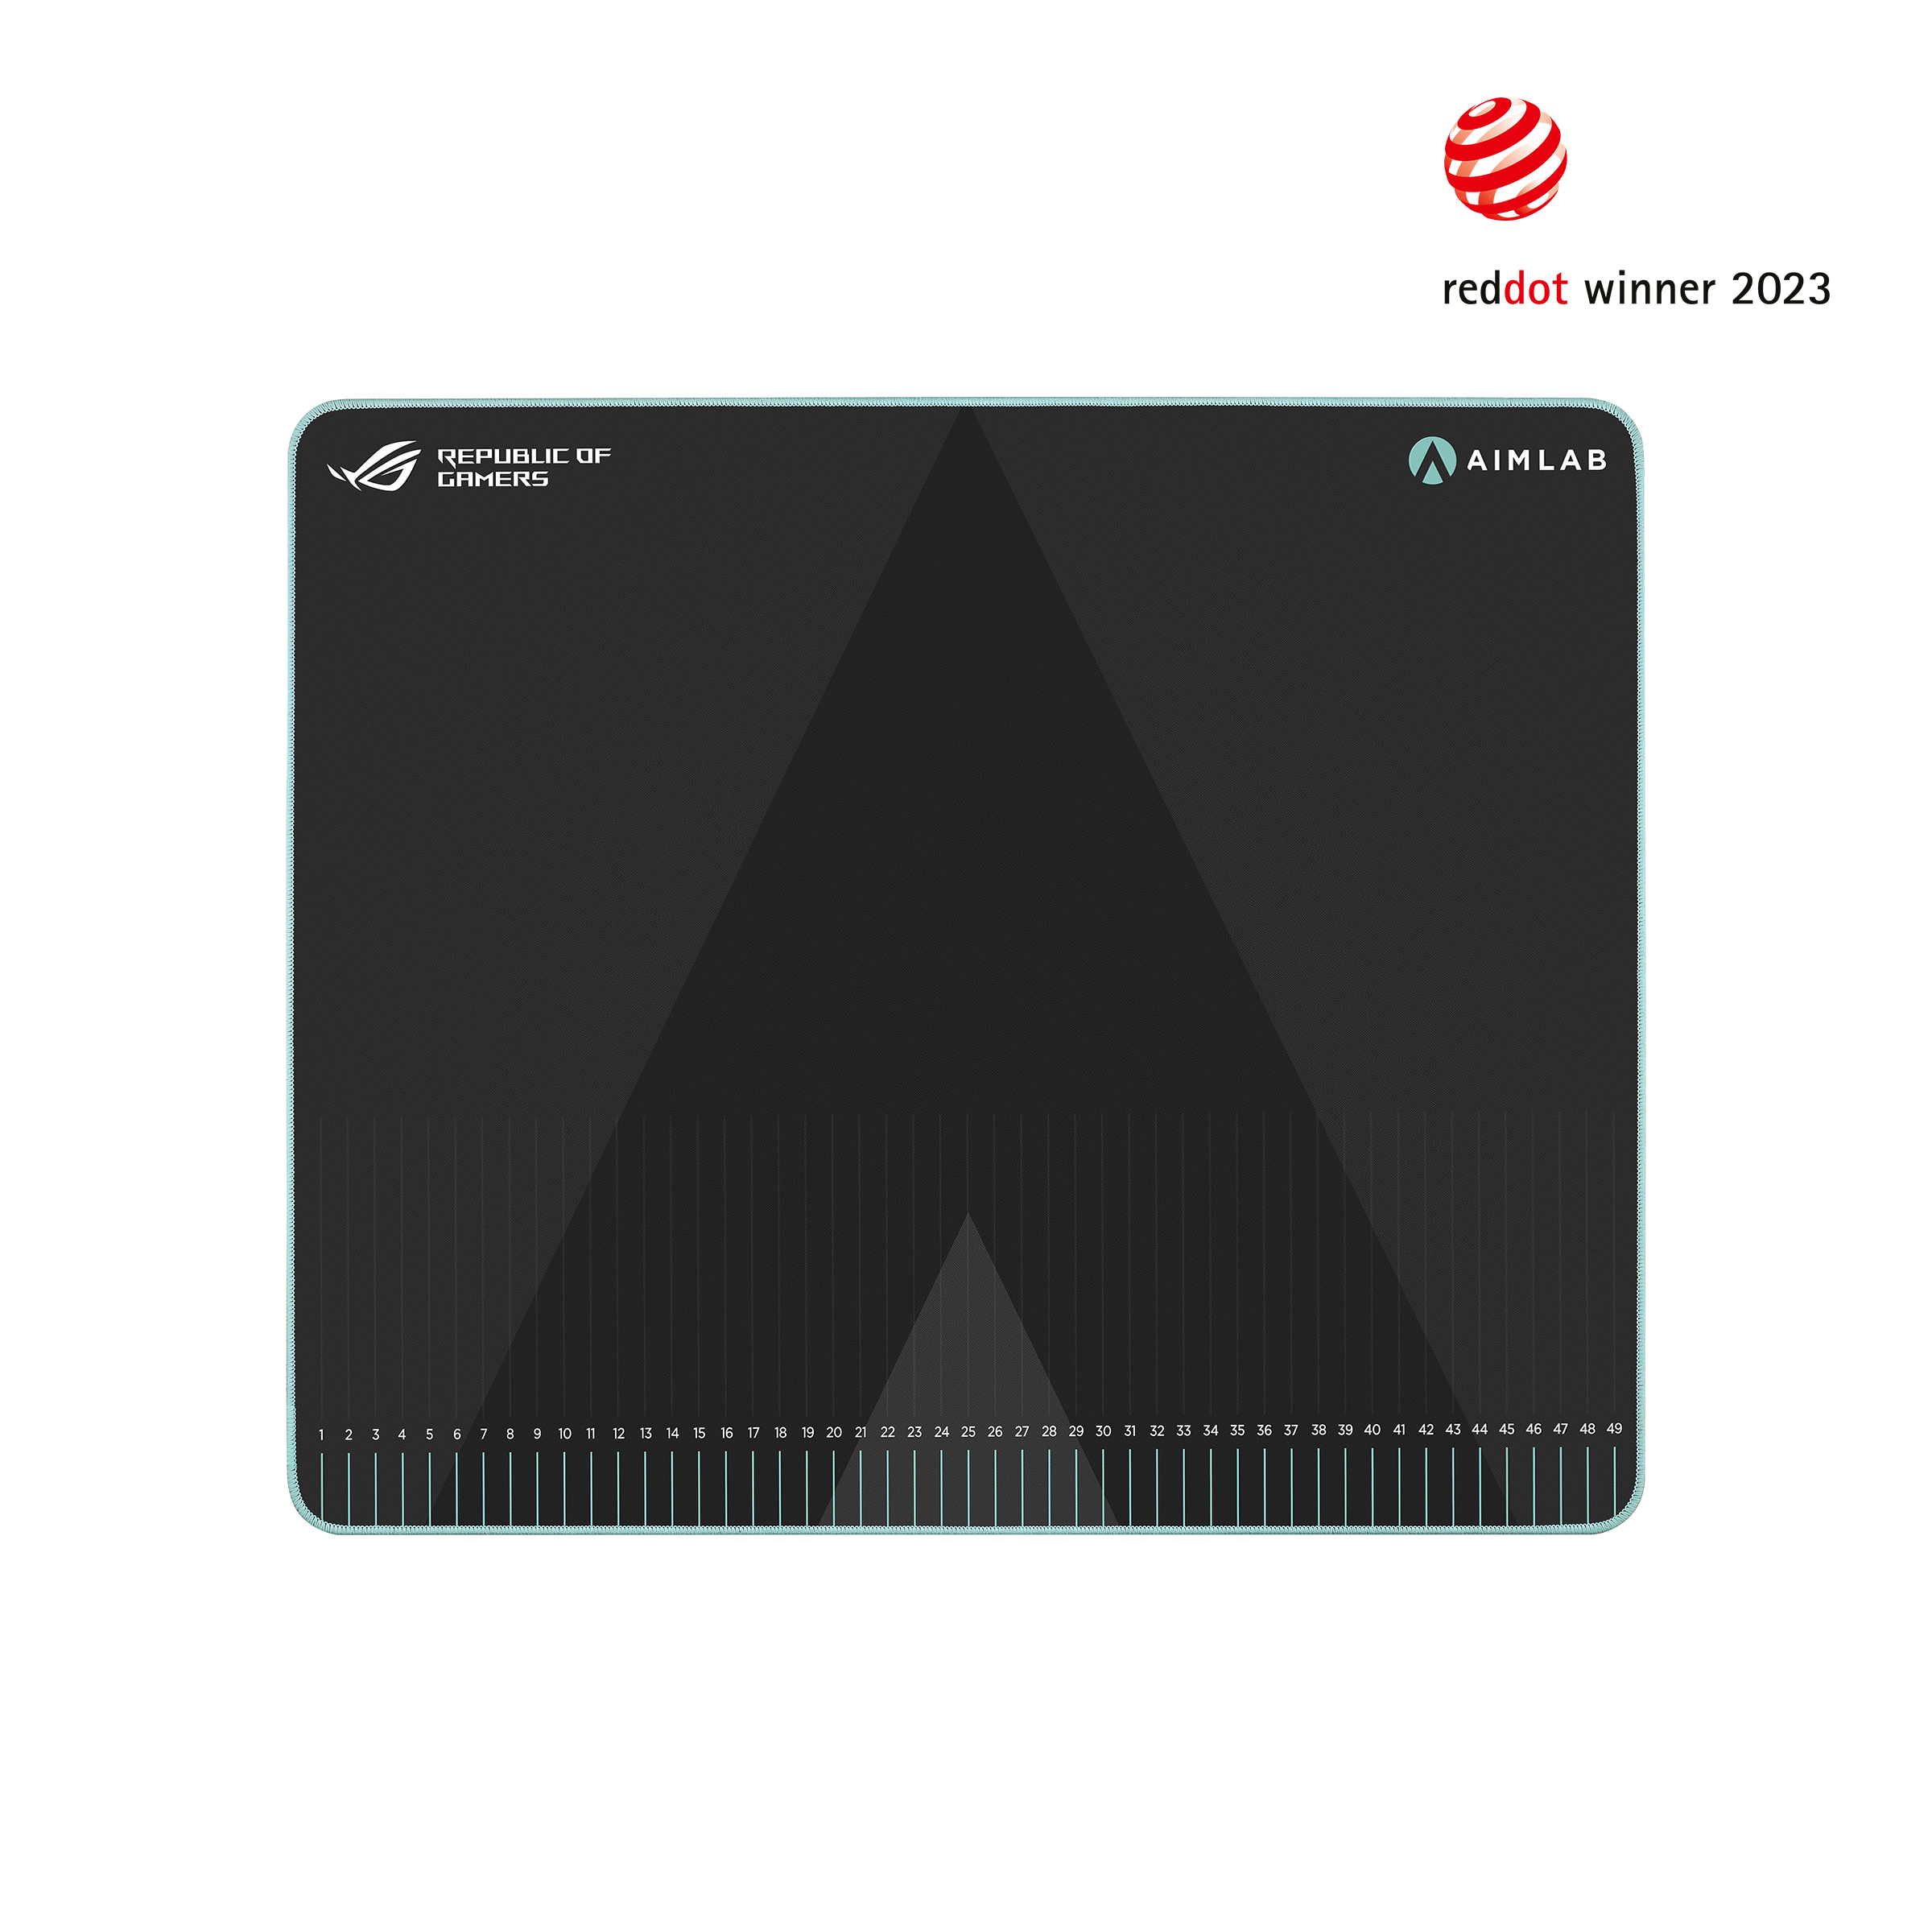 Mouse Pad Size - Dimension, Inches, mm, cms, Pixel